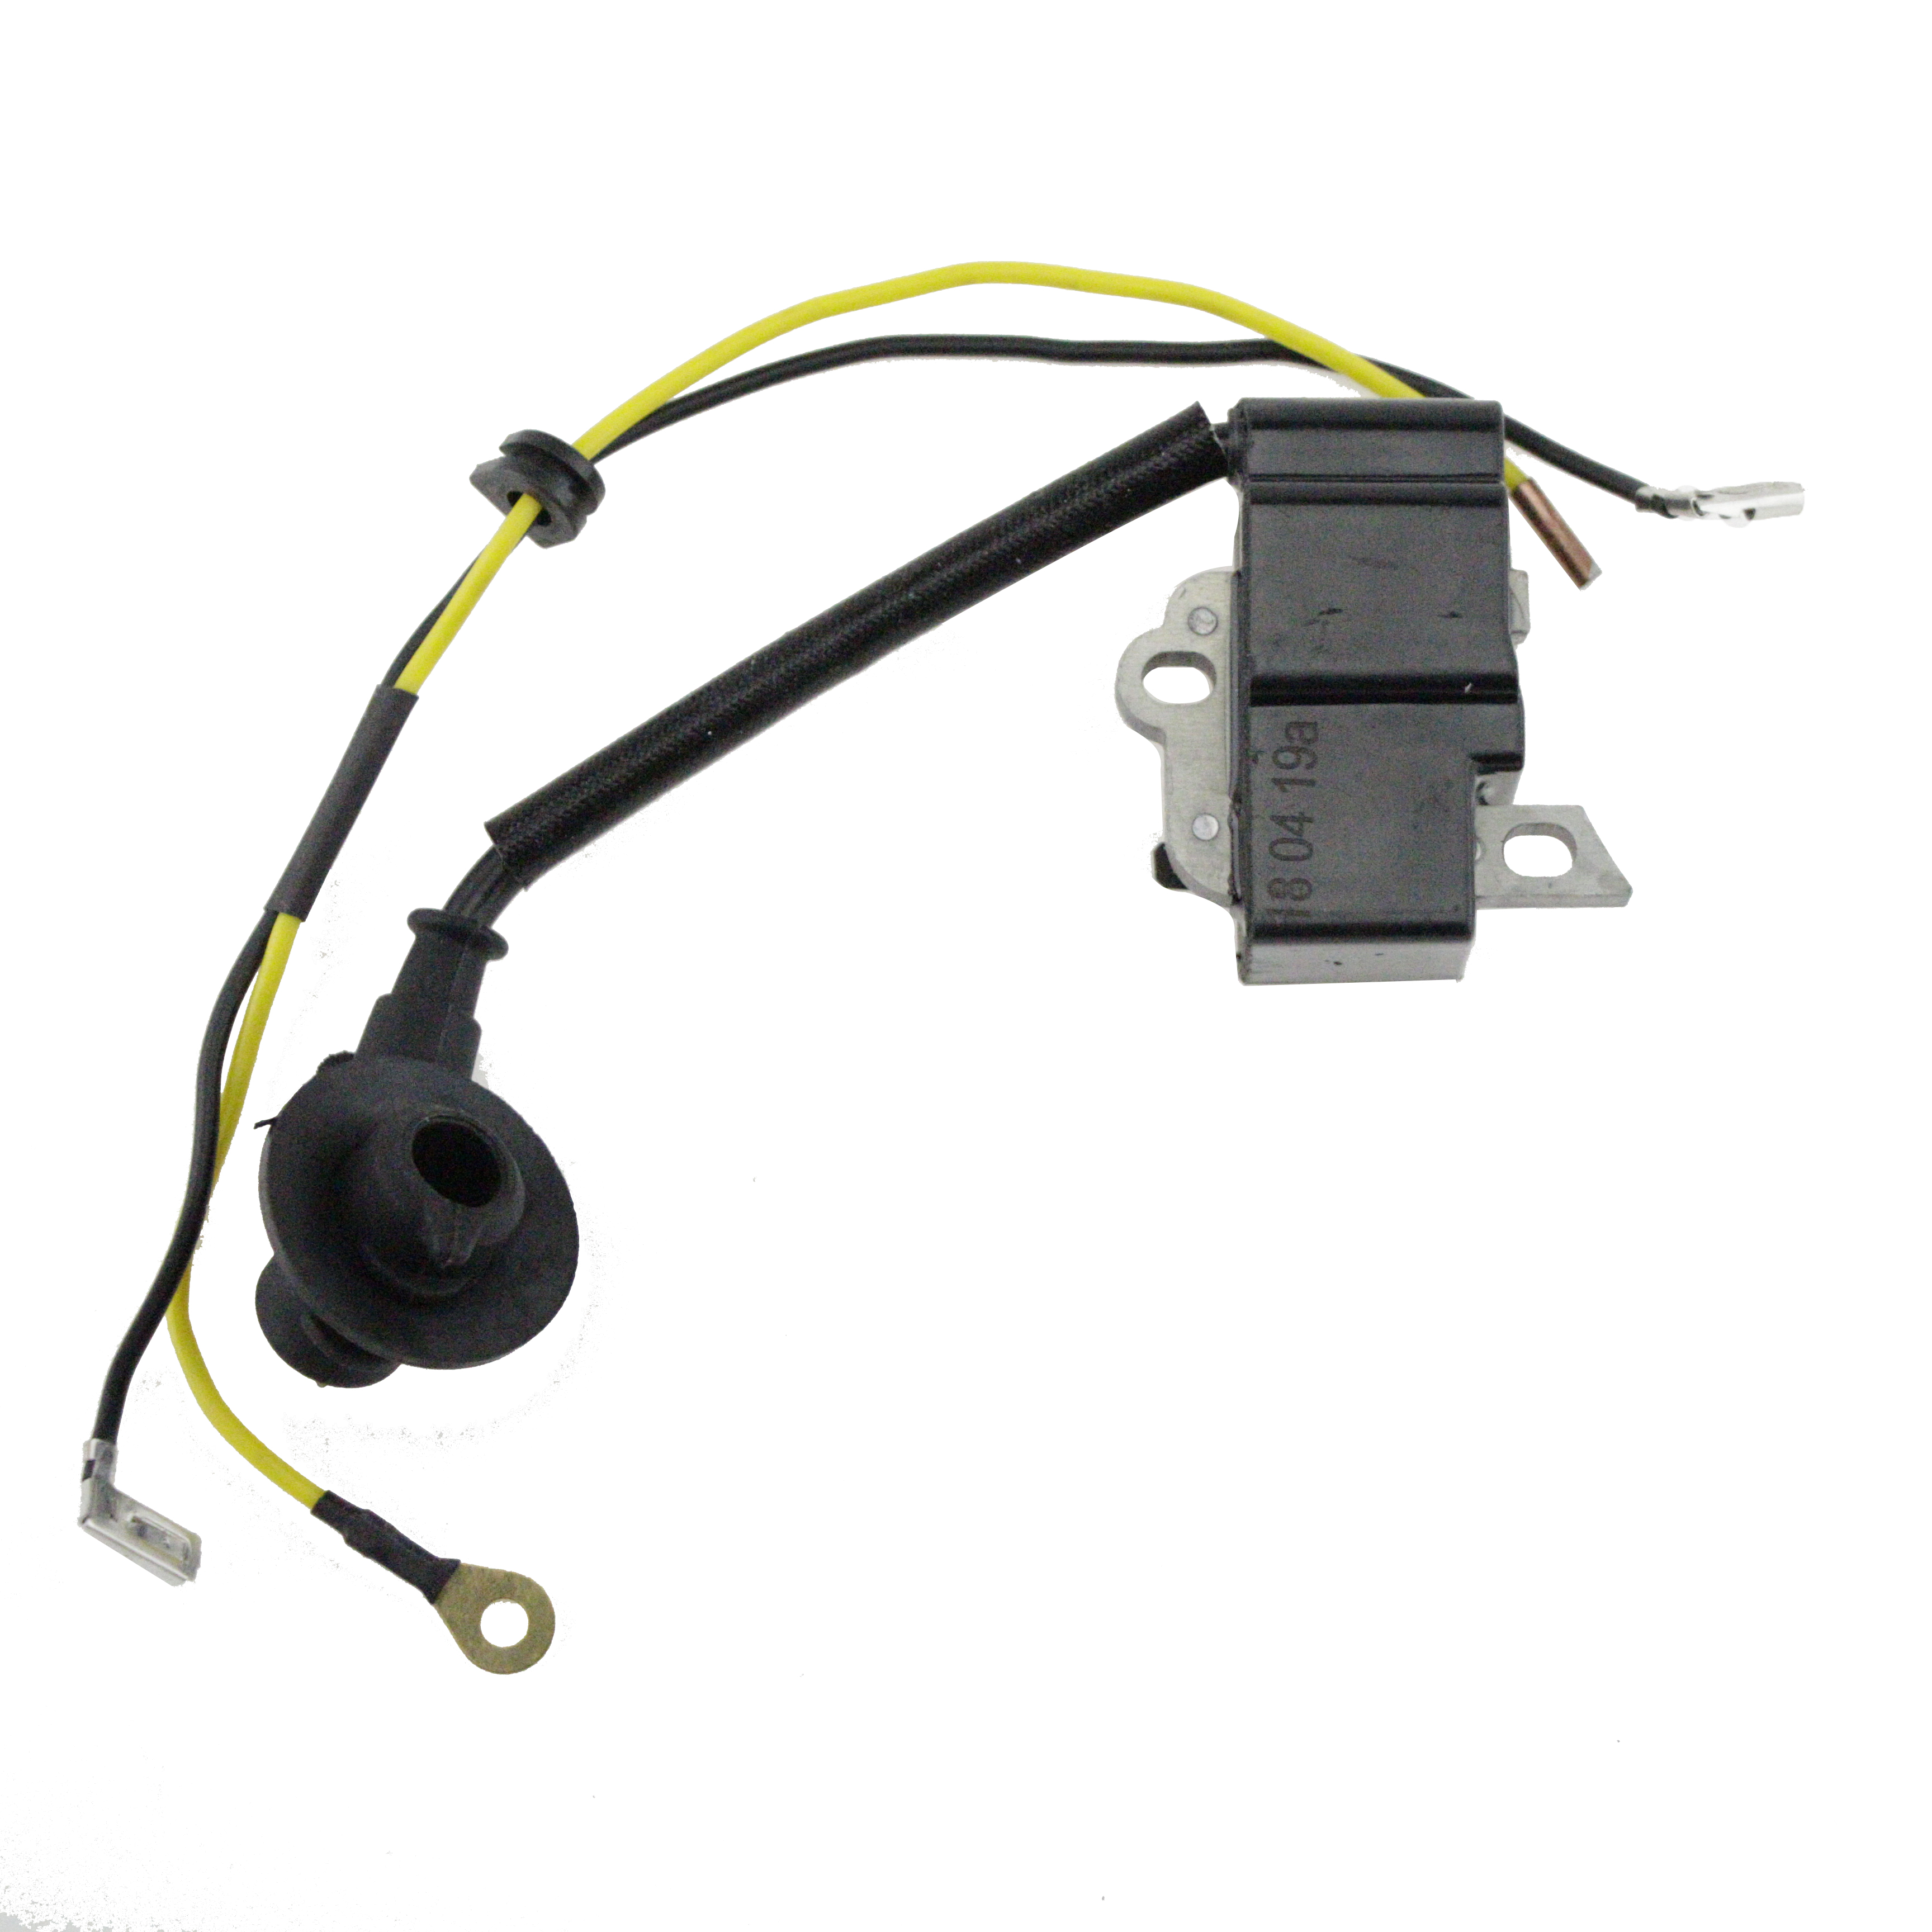 Ignition Coil Module For Stihl Ms251 Ms261c Replace 1141 400 1307 Chainsaw Part 